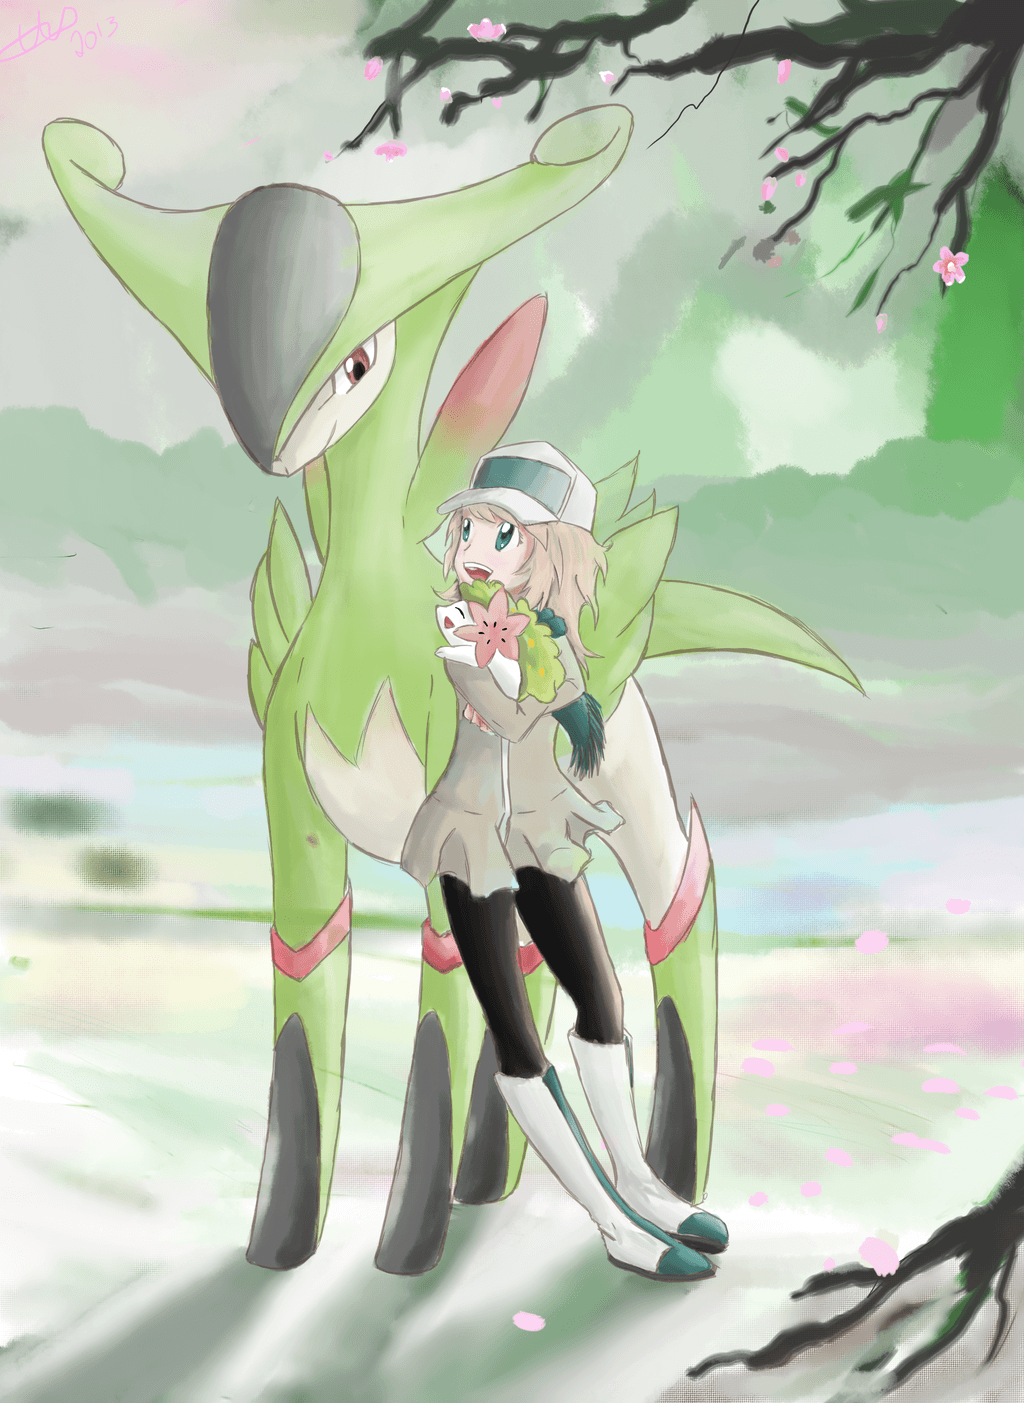 Virizion and Kytte